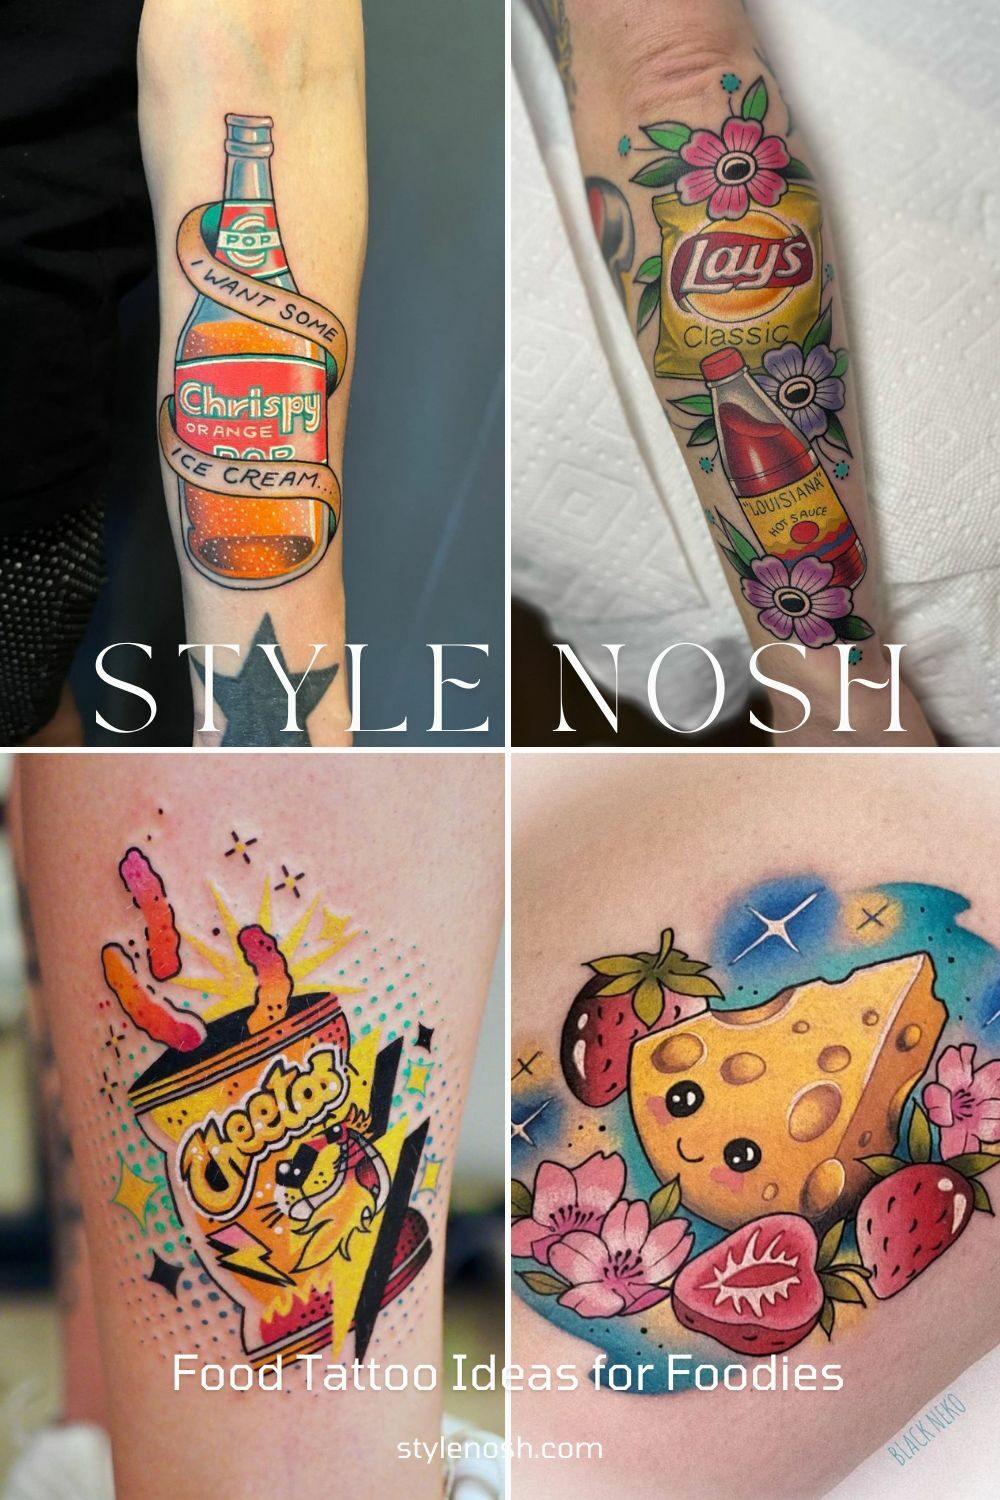 If you are a foodie you may want to get a tattoo on your arm that features an artistic rendition of your favorite dish